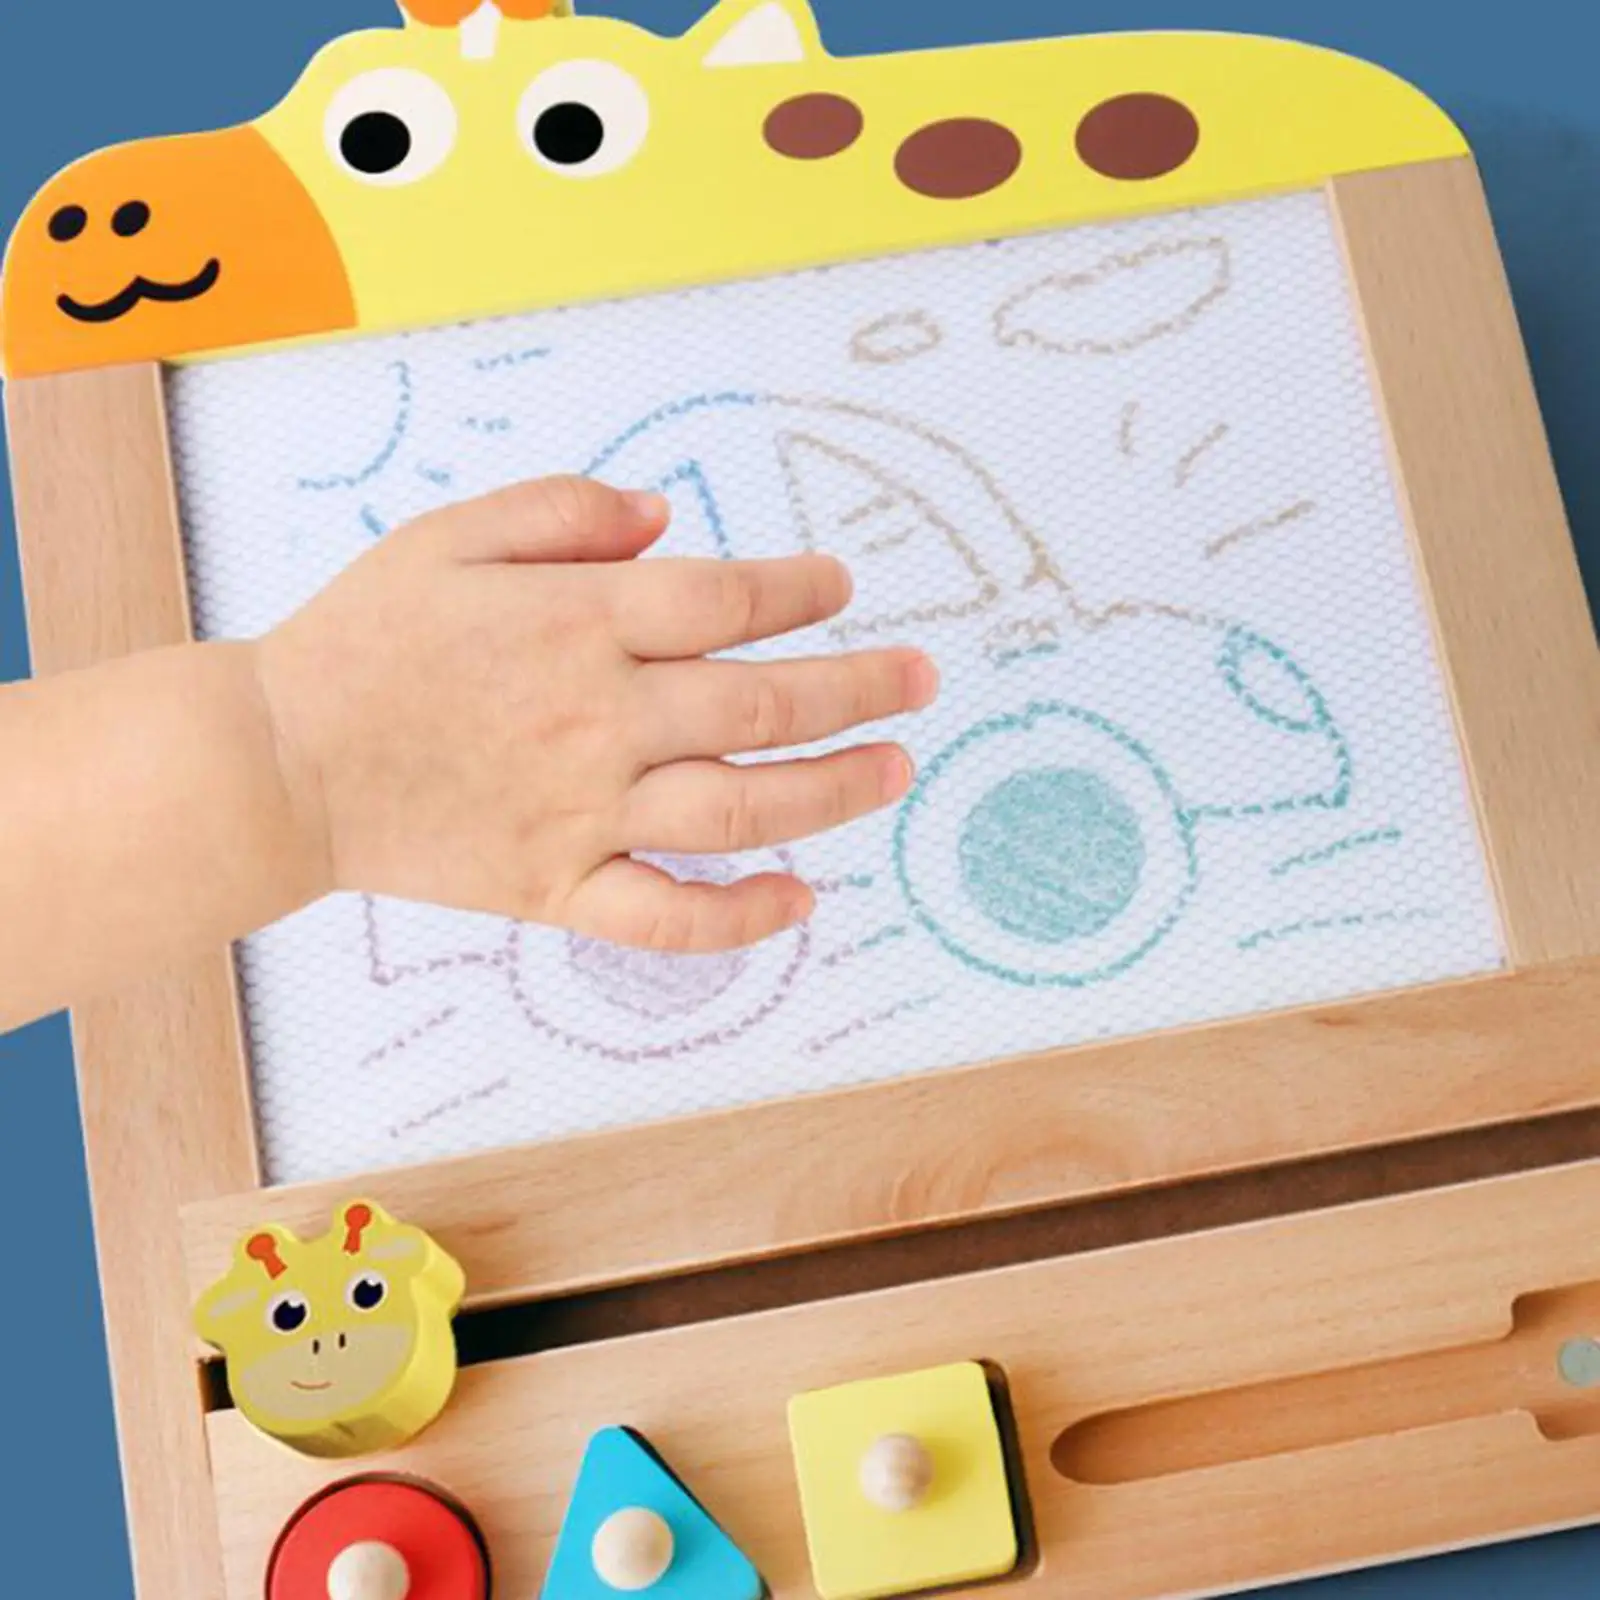 Drawing Board Car Travel Toys Writing Painting Sketch Pad fors Children 1-2 Years Old Boys Girls Birthday Gift